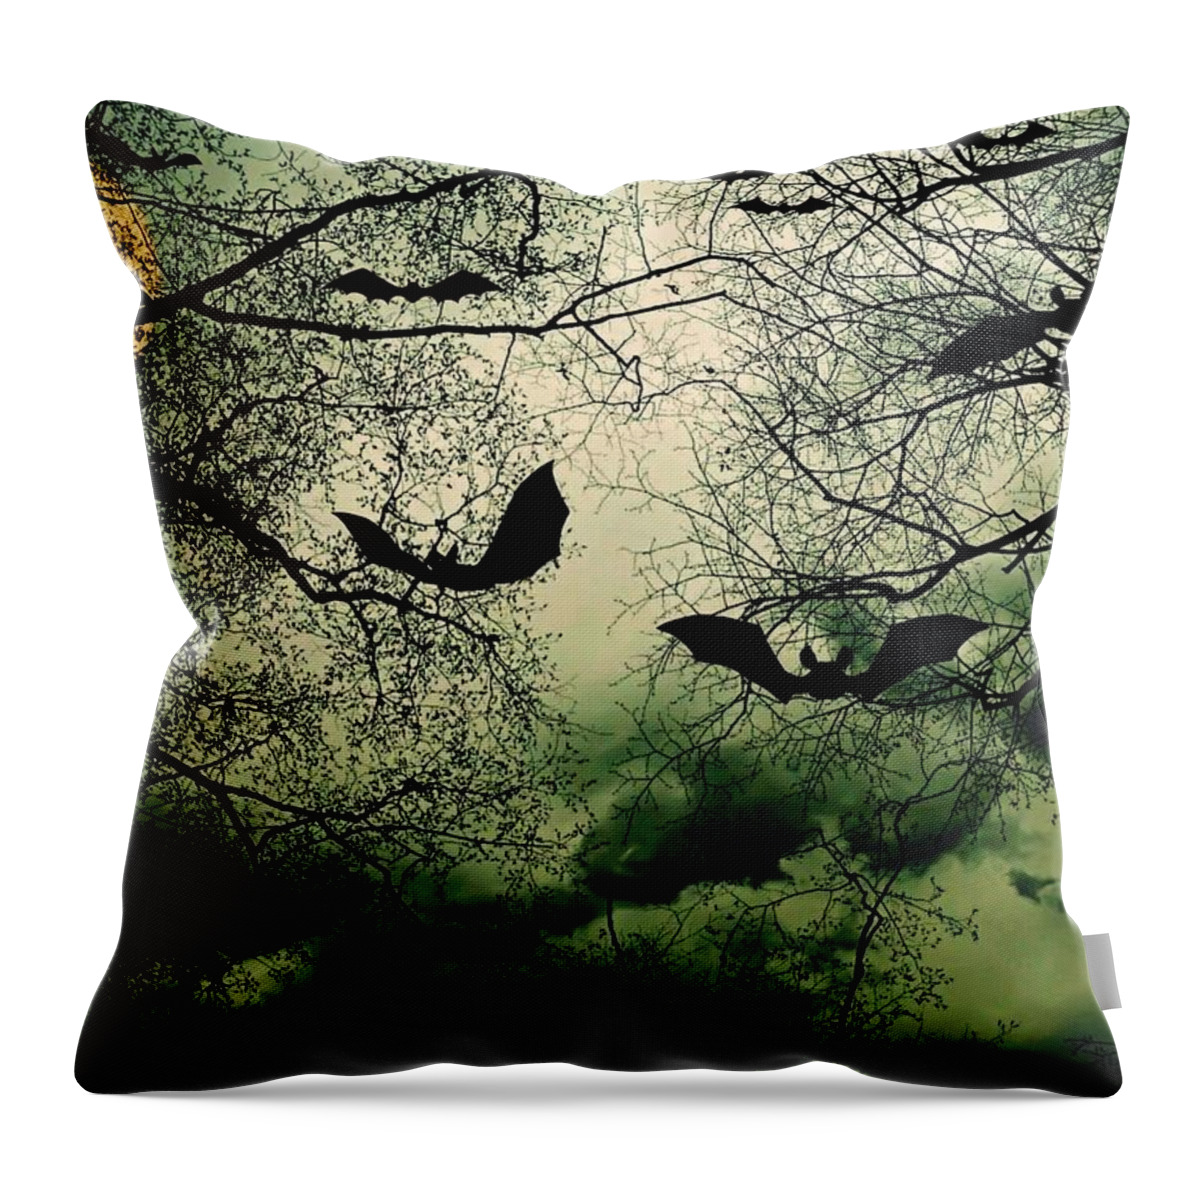 Abstract Throw Pillow featuring the photograph Bats From Hell by Barbara S Nickerson